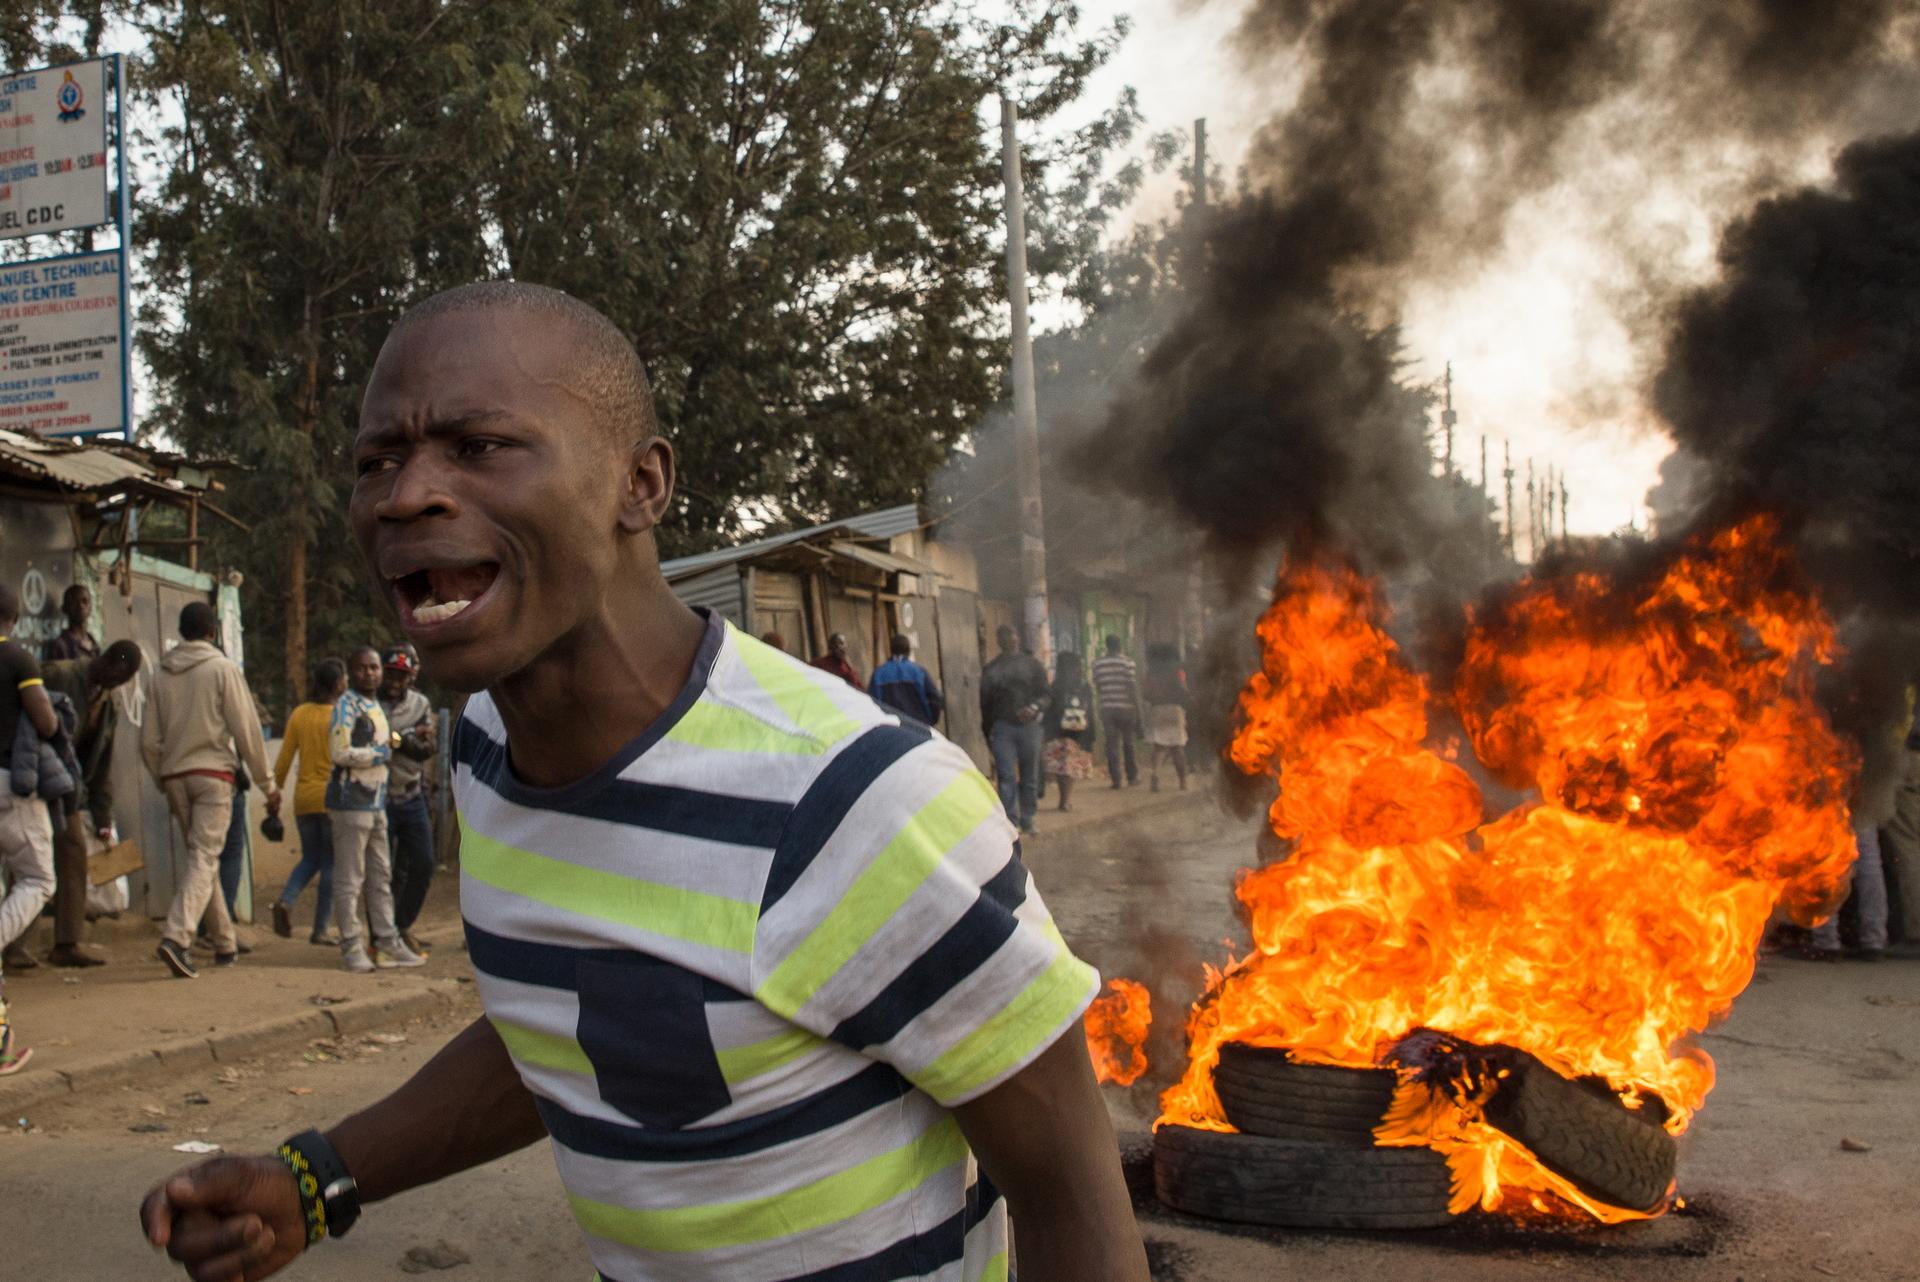 “Uhuru must go!” yells a demonstrator in Kibera, an informal settlement in Nairobi, Kenya. The man blamed current President Uhuru Kenyatta for the lack of jobs and widespread poverty in the area, and demanded that the President step down from office.